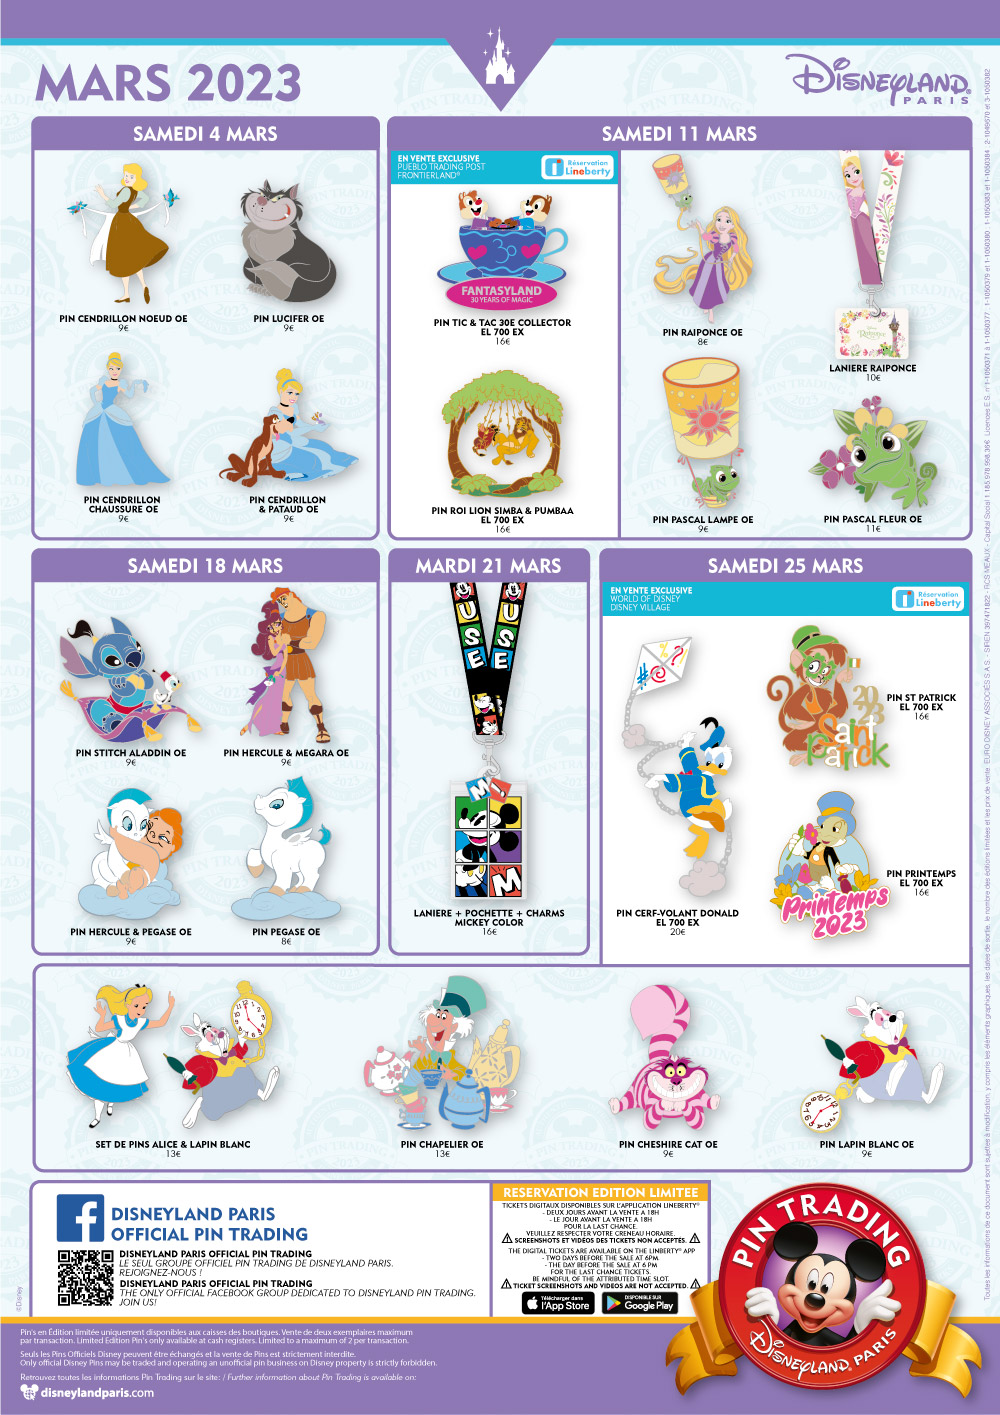 Disneyland Paris New Pin Releases for March 2023 Travel to the Magic